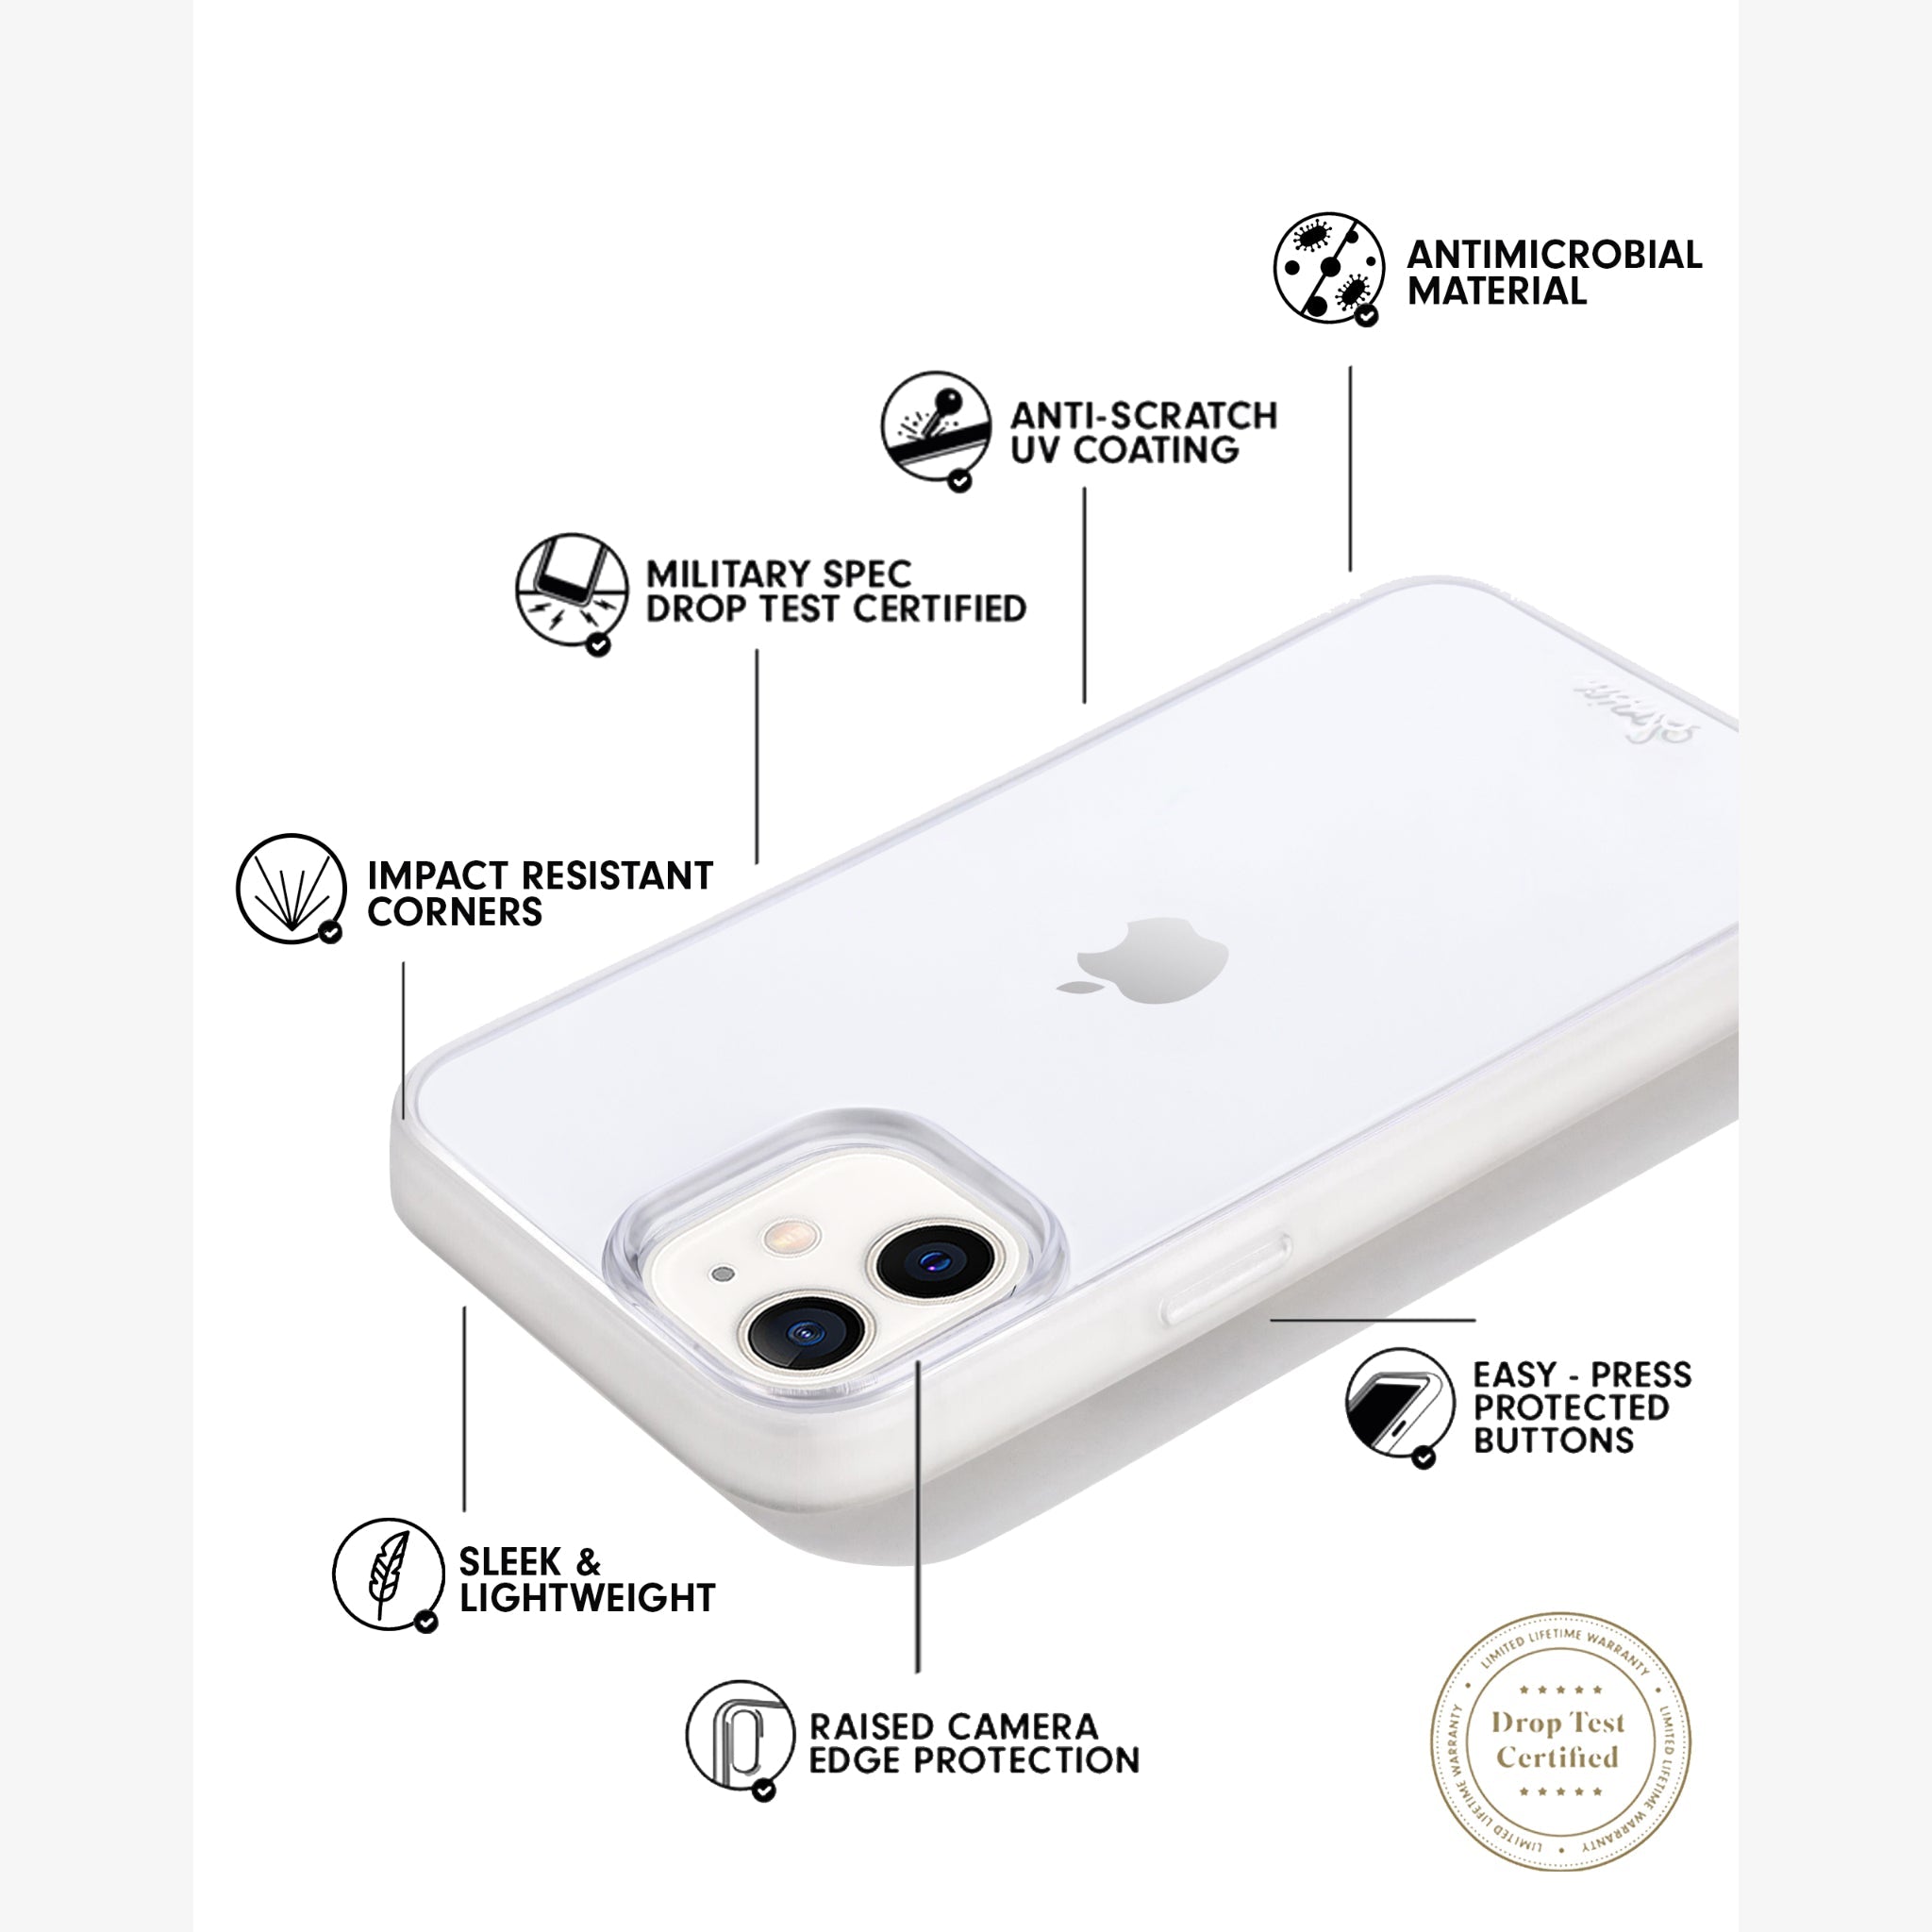 protective qualities of the phone case shown around a white iphone